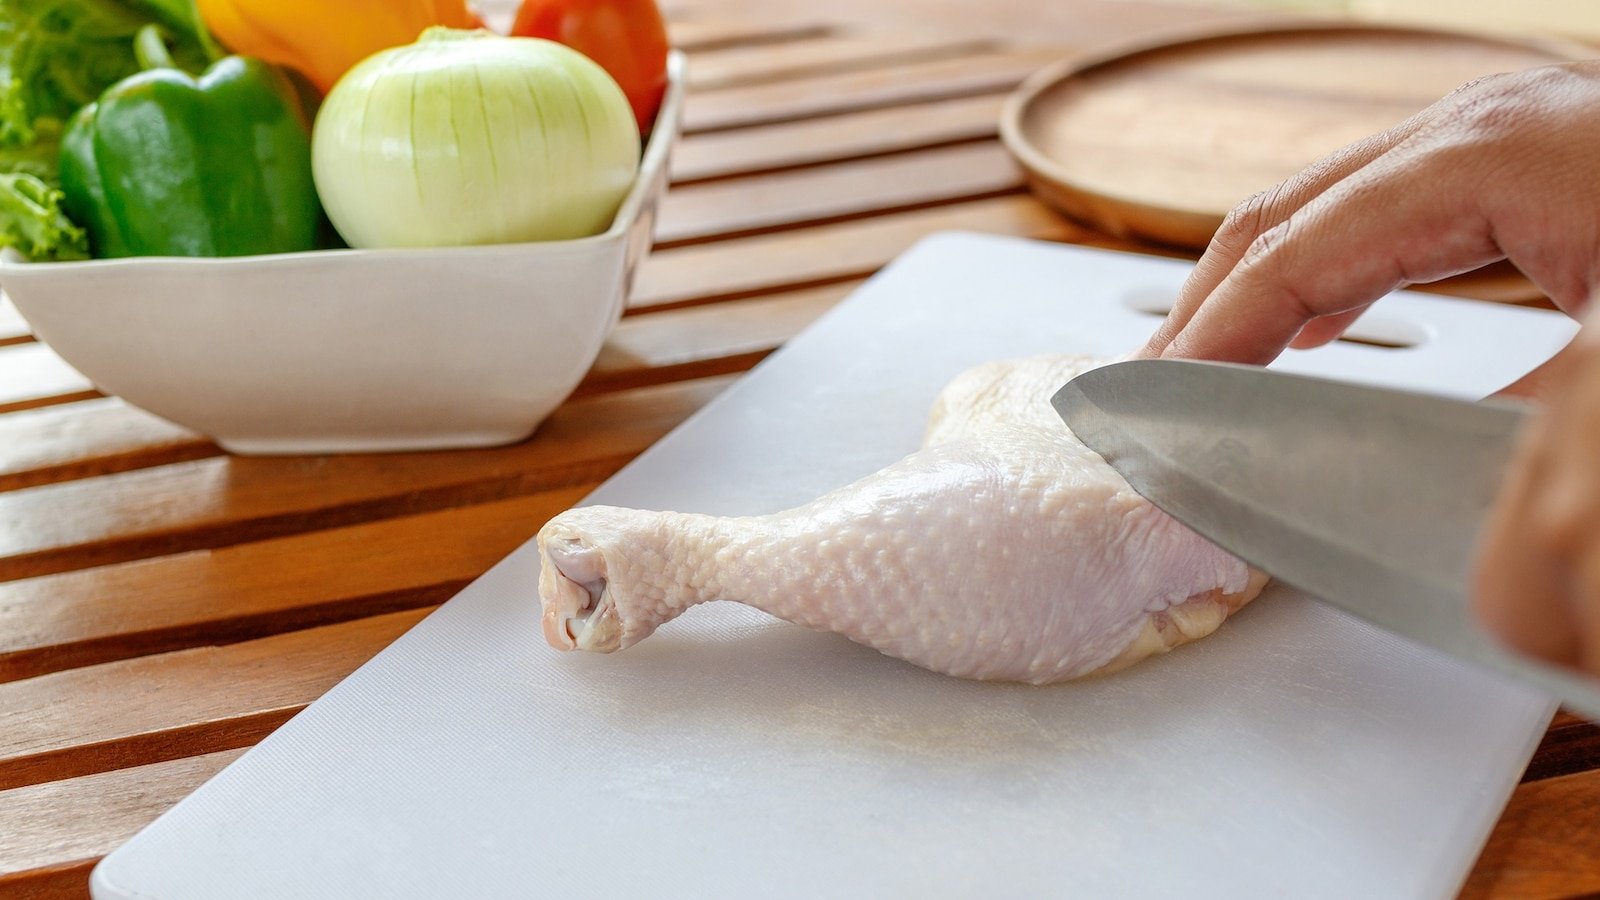 What to know about new USDA policy aimed to reduce salmonella in raw poultry